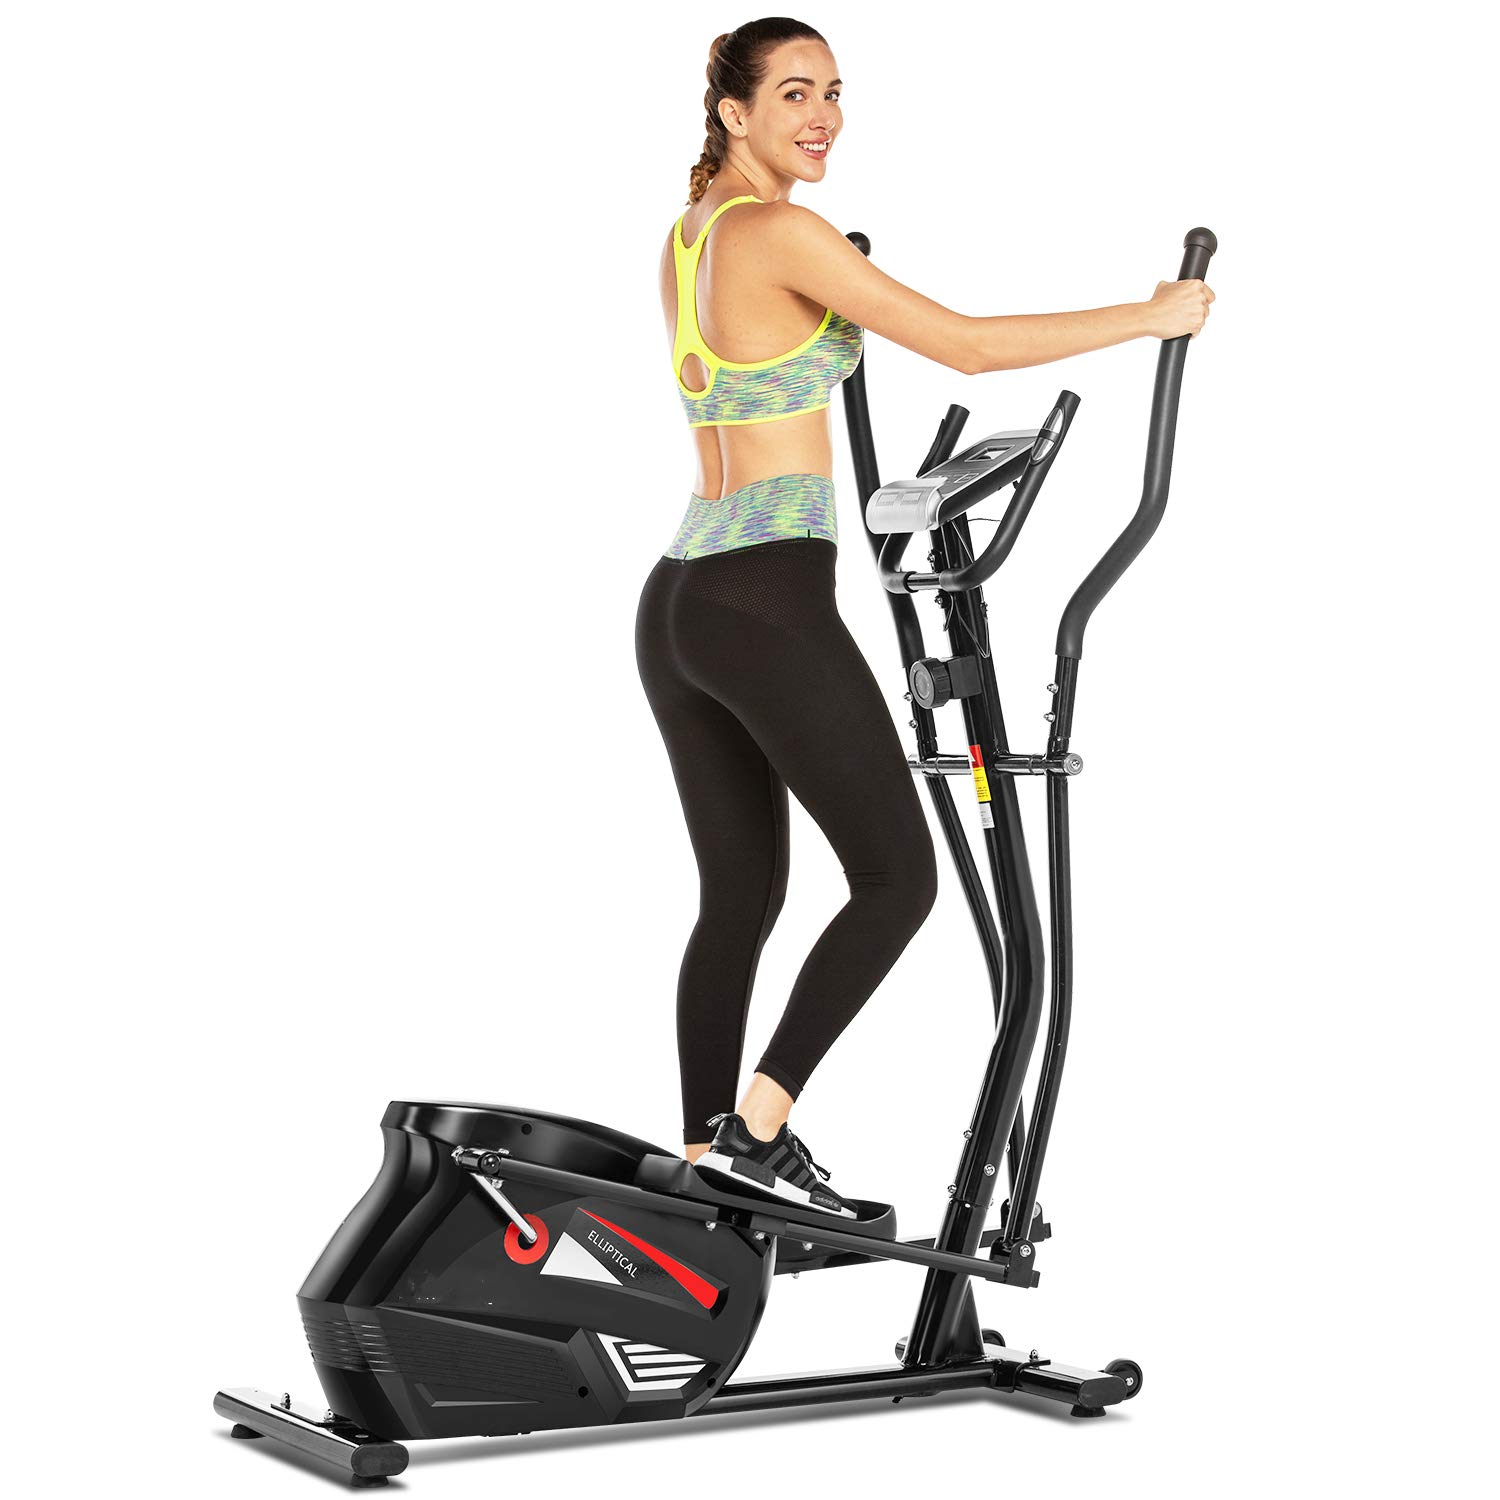 FUNMILY Magnetic Elliptical Exercise Machine for Home Use